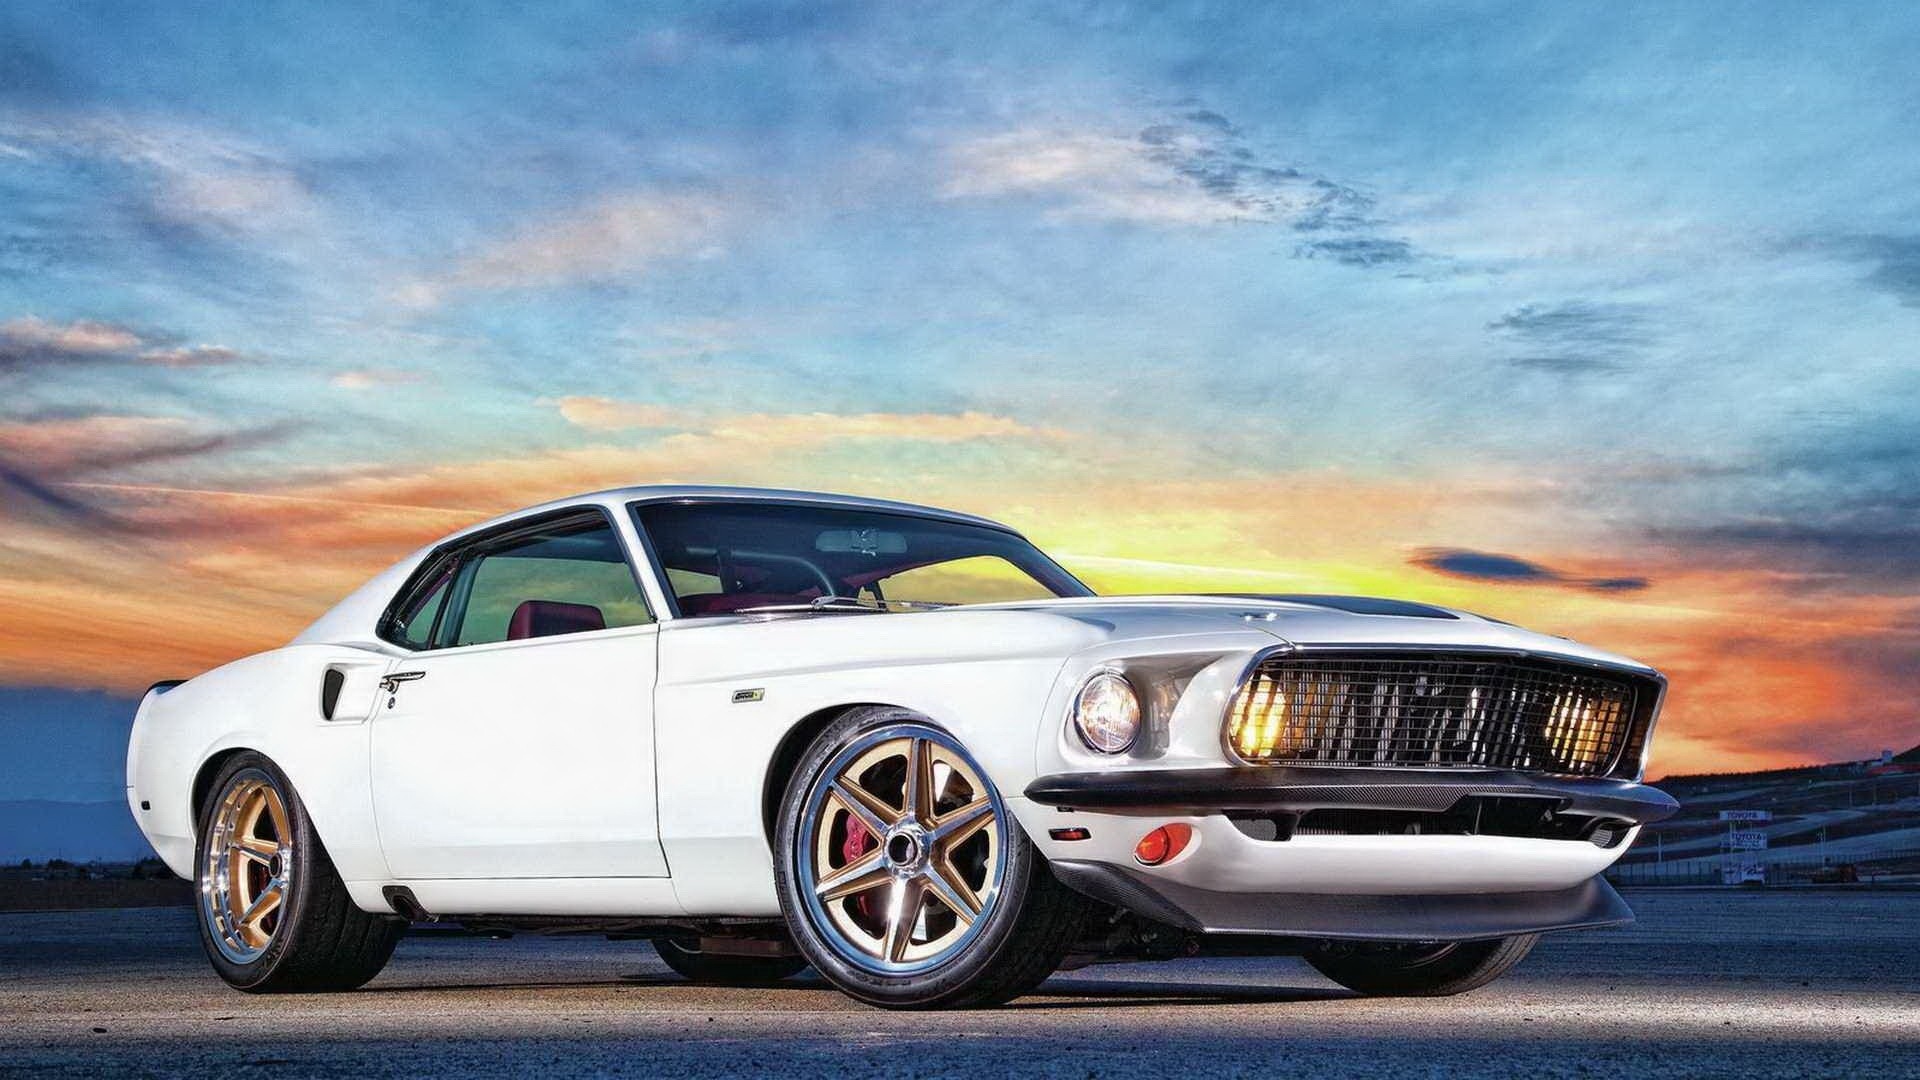 1920x1080  Wallpaper ford mustang, muscle car, white, side view